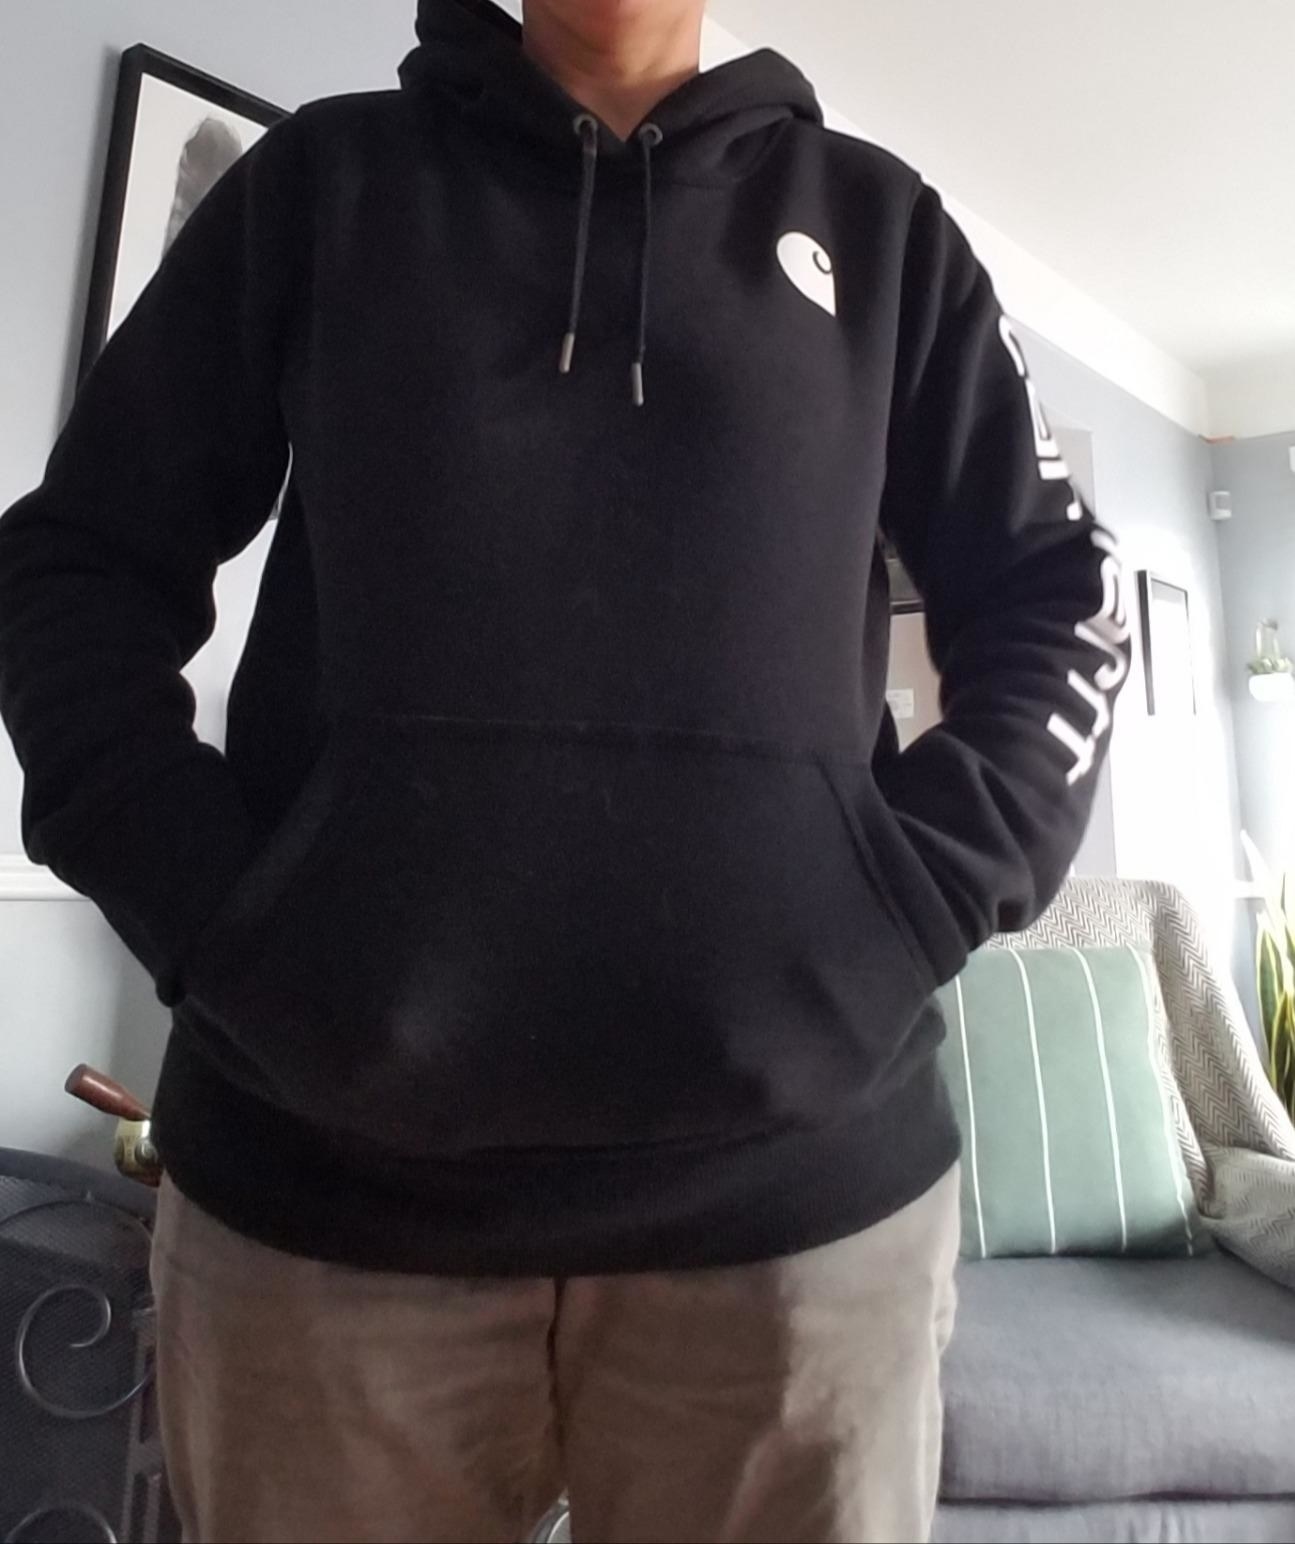 A reviewer wearing a black hoodie with brown pants